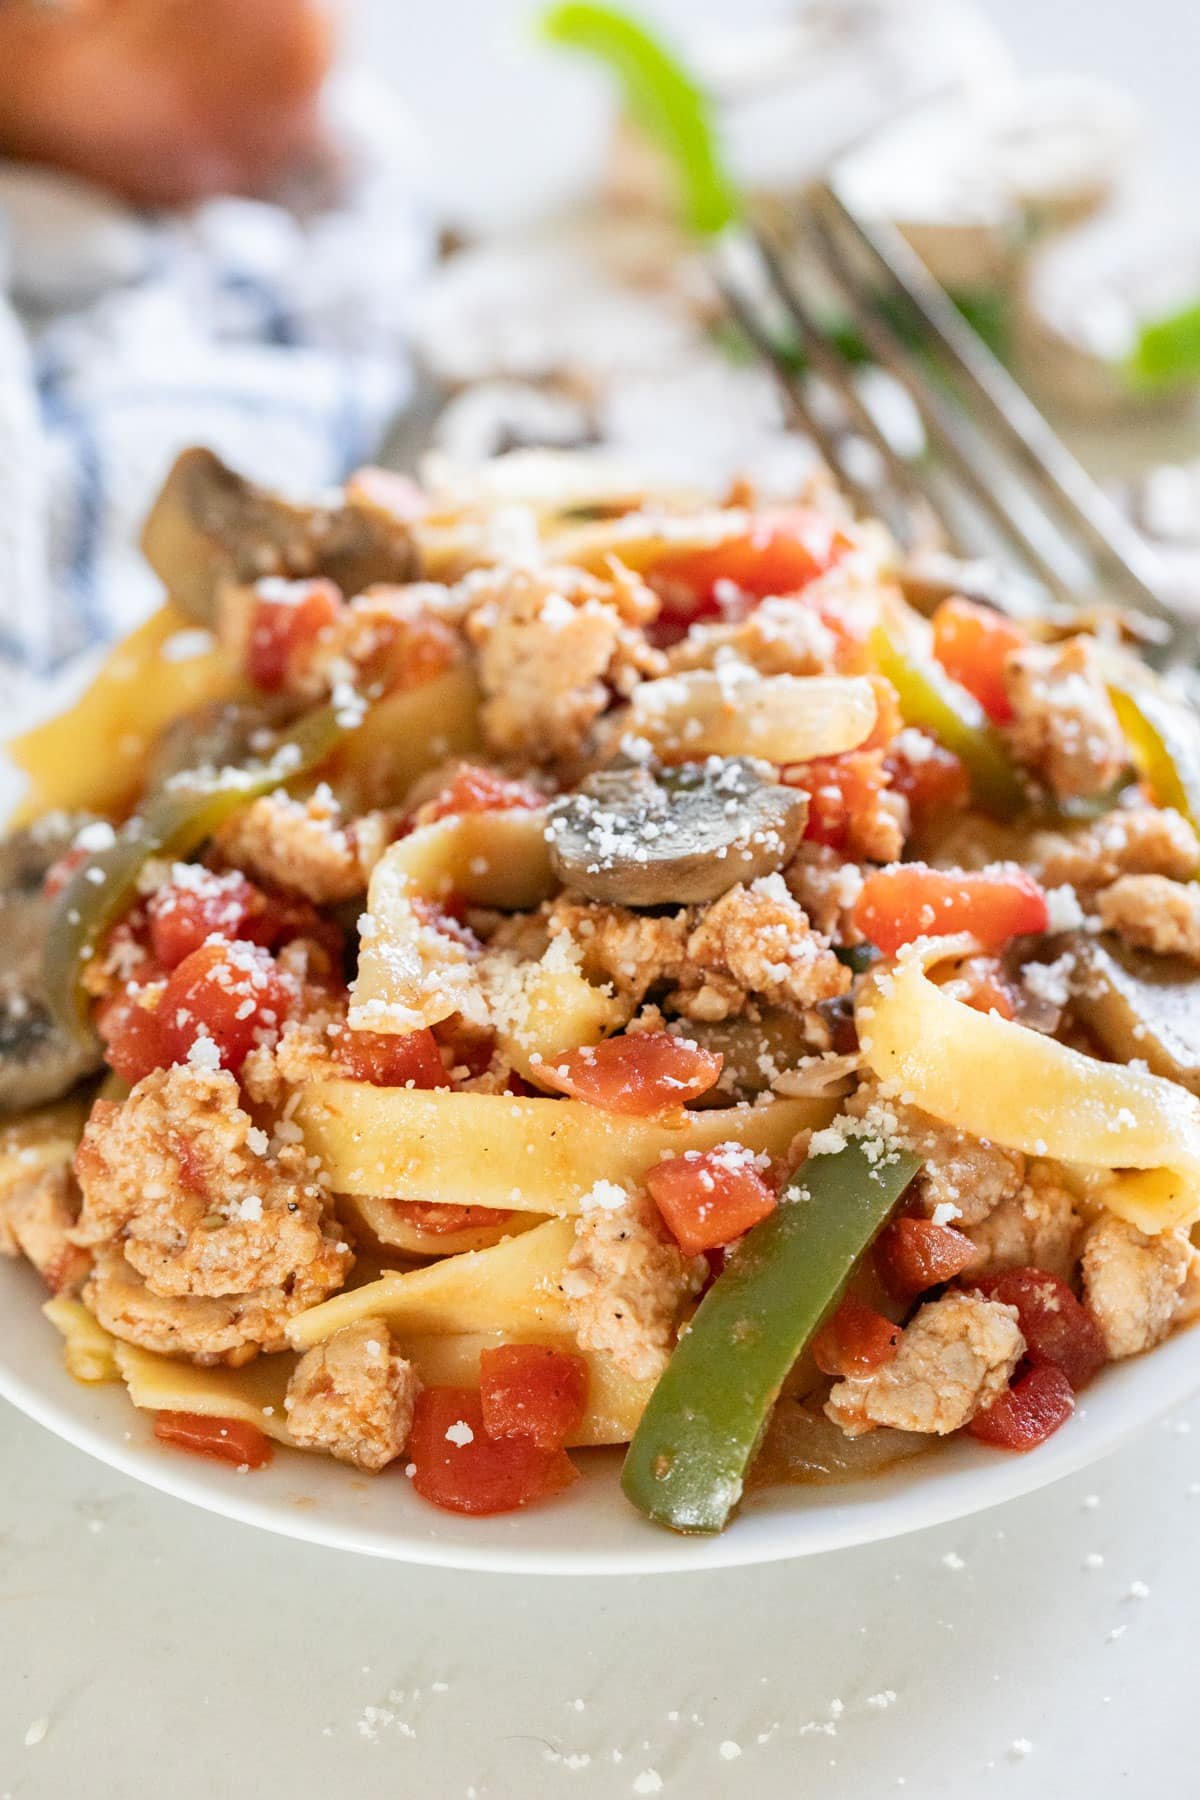 A close up of a bowl of pasta with sausage and peppers.